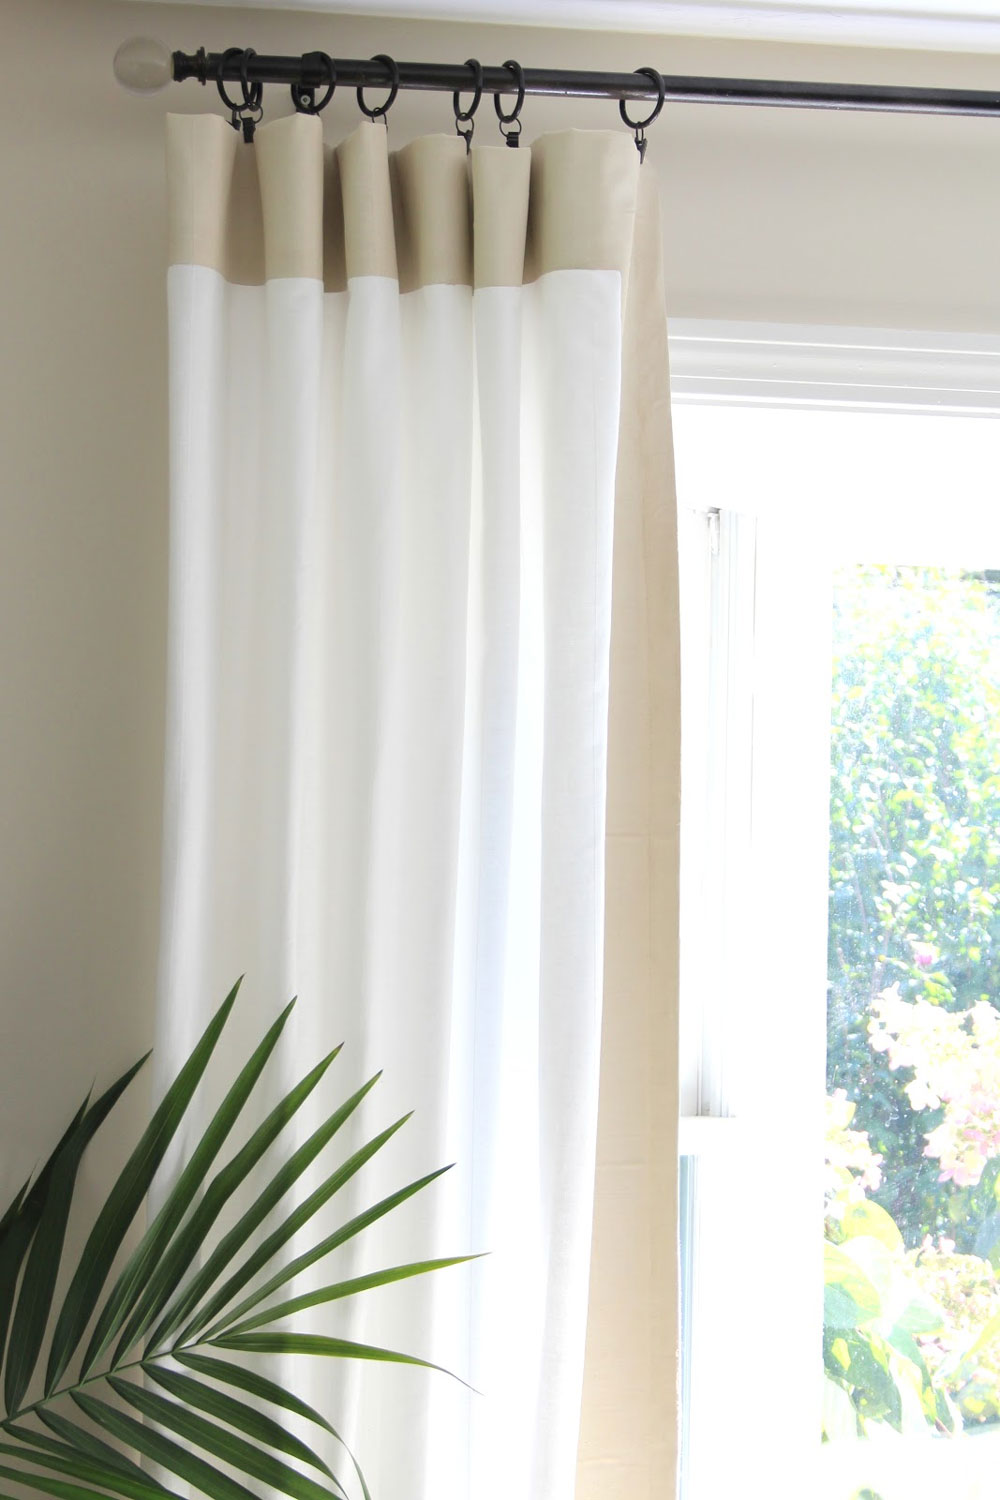 French Door Curtain Rods in Curtain